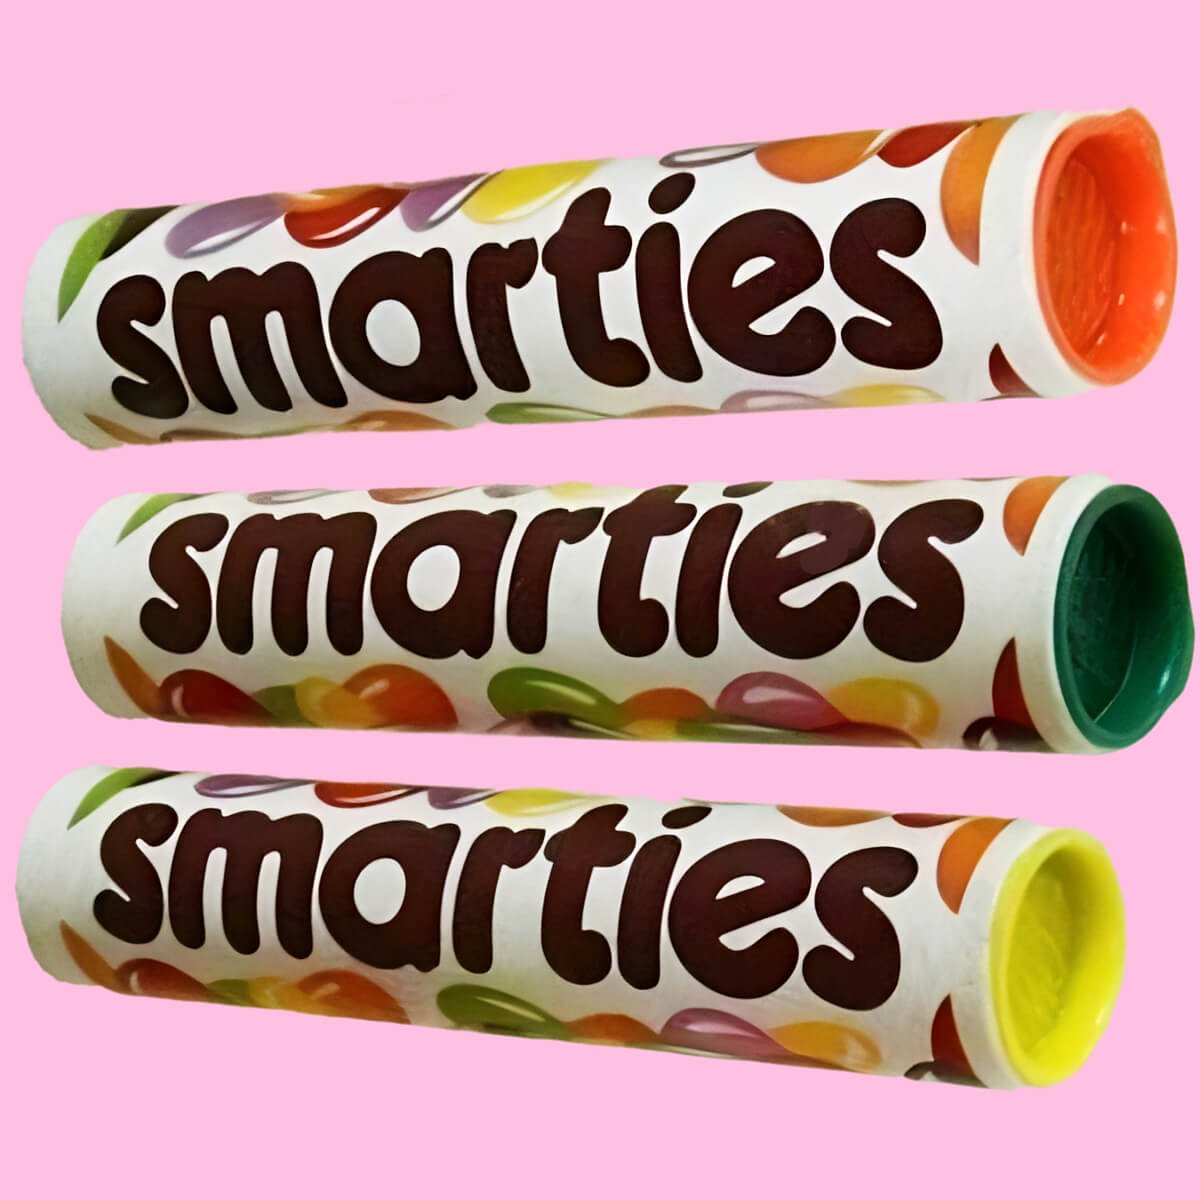 Nestlé Smarties: Fun Facts and History